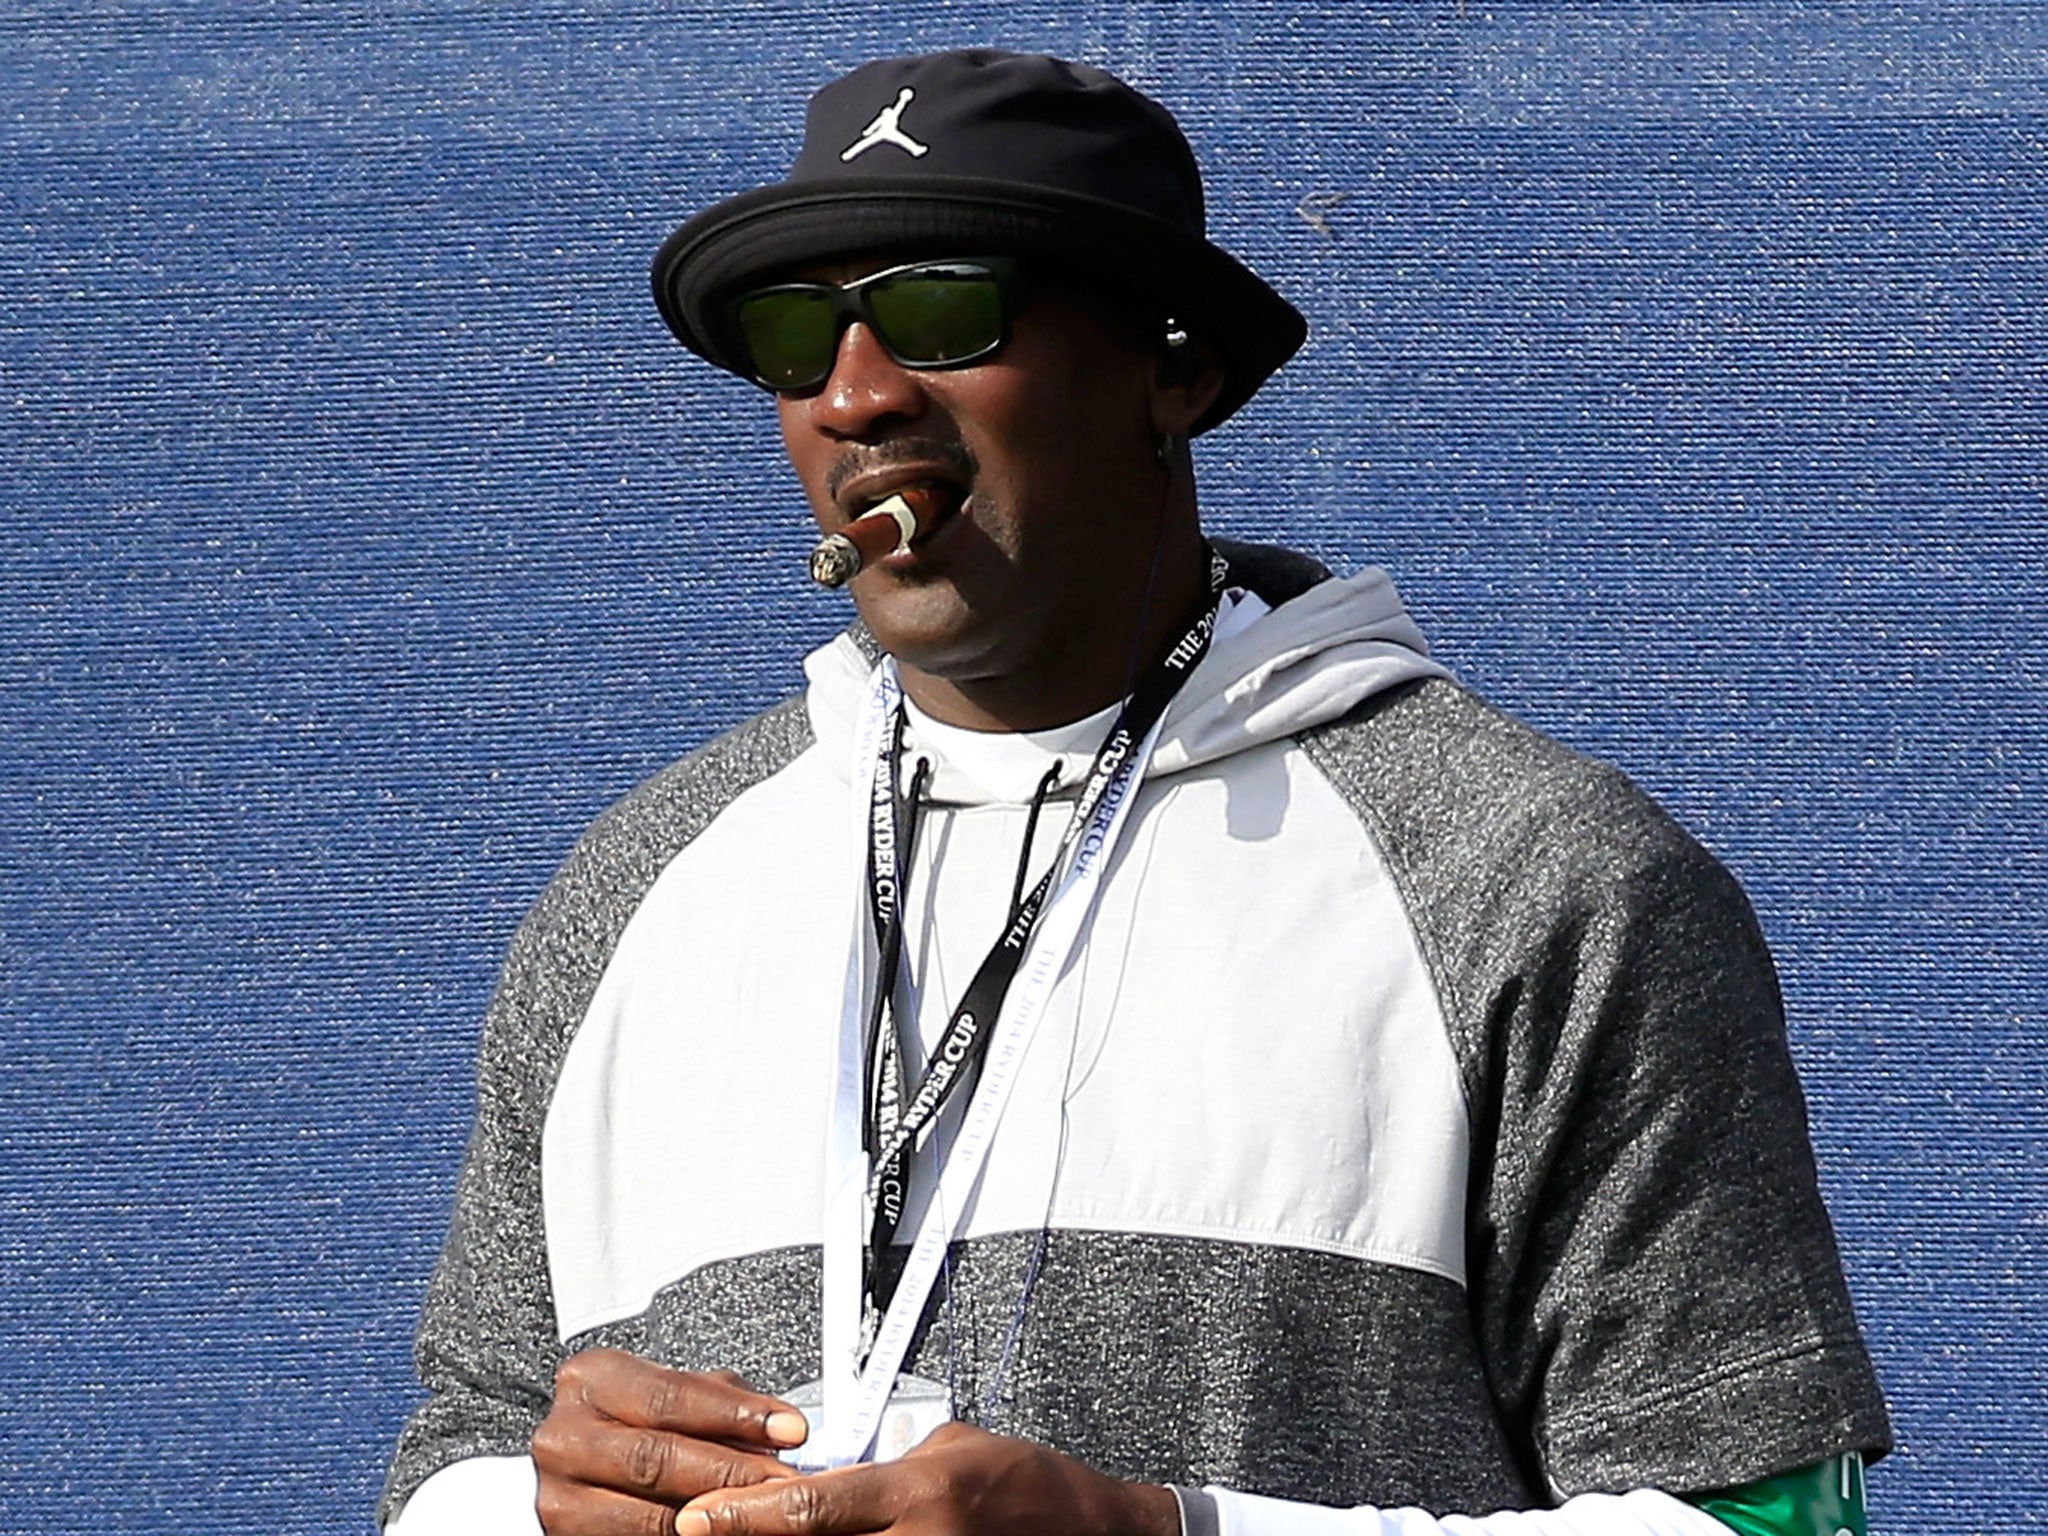 USA's cheerleader in chief Michael Jordan watches on with a cigar that Miguel Angel Jimenez would be proud of